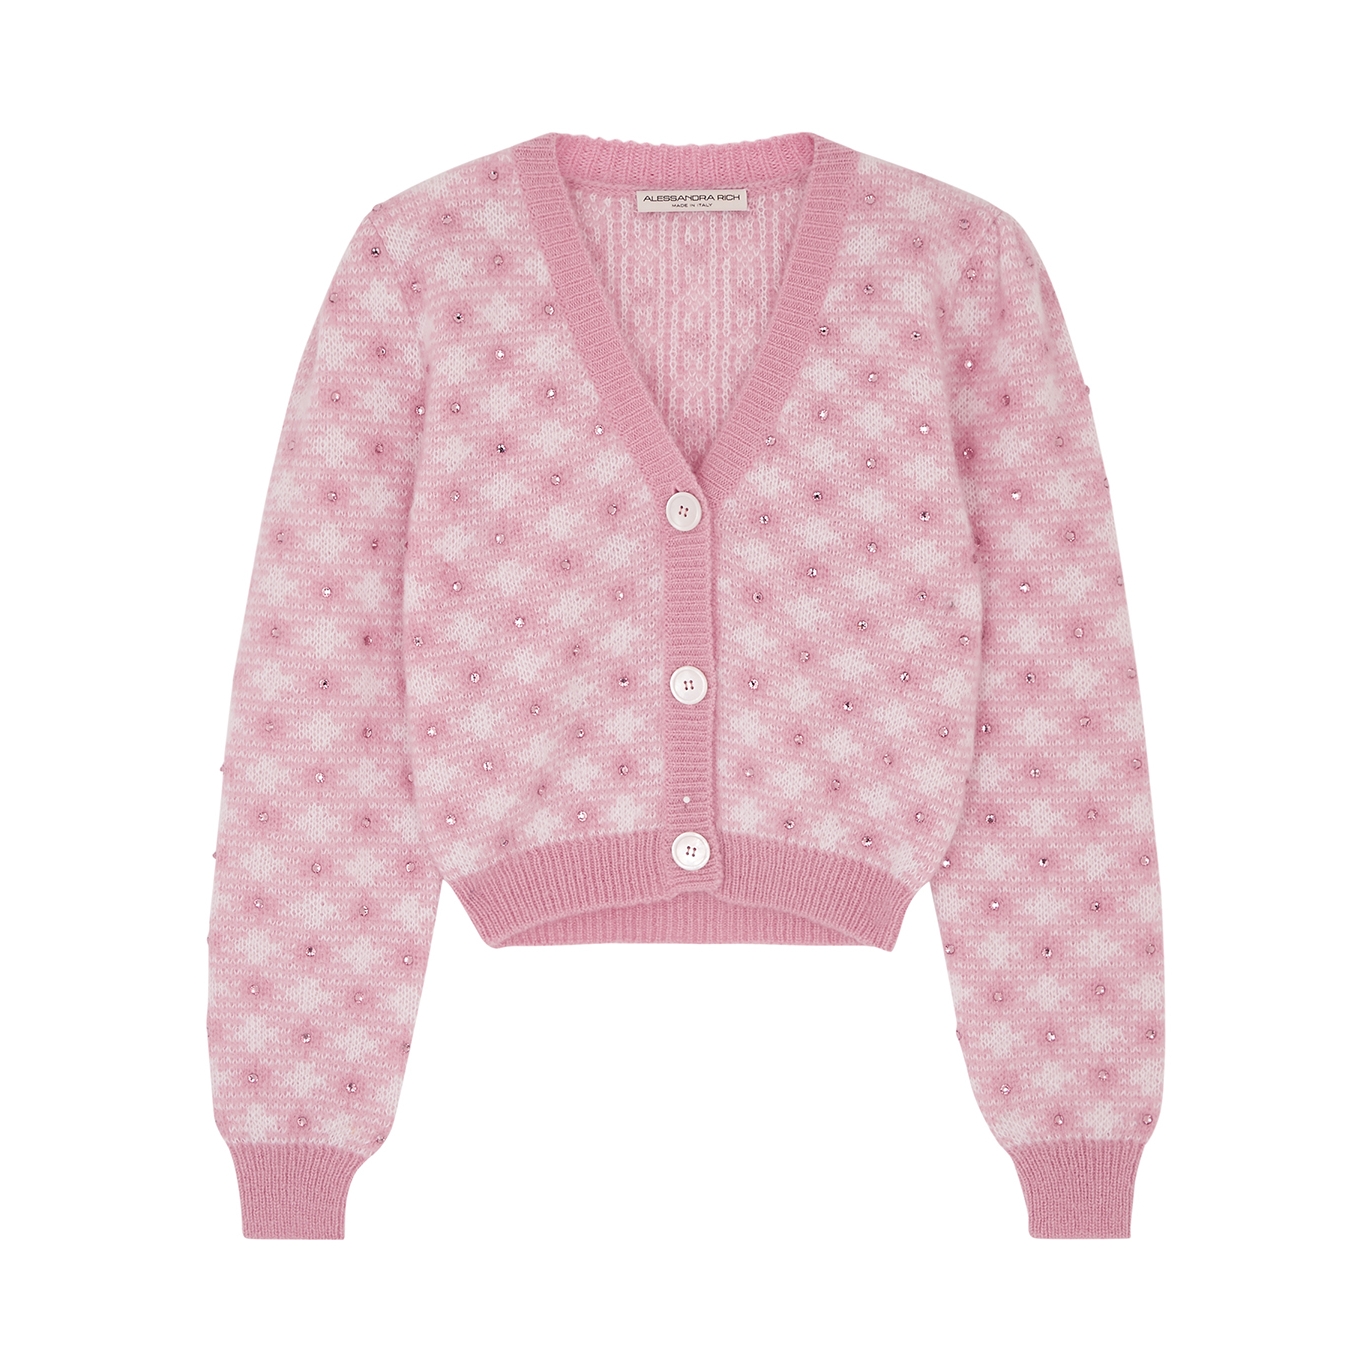 Alessandra Rich Vichy Embellished Mohair-blend Cardigan - Pink - 12